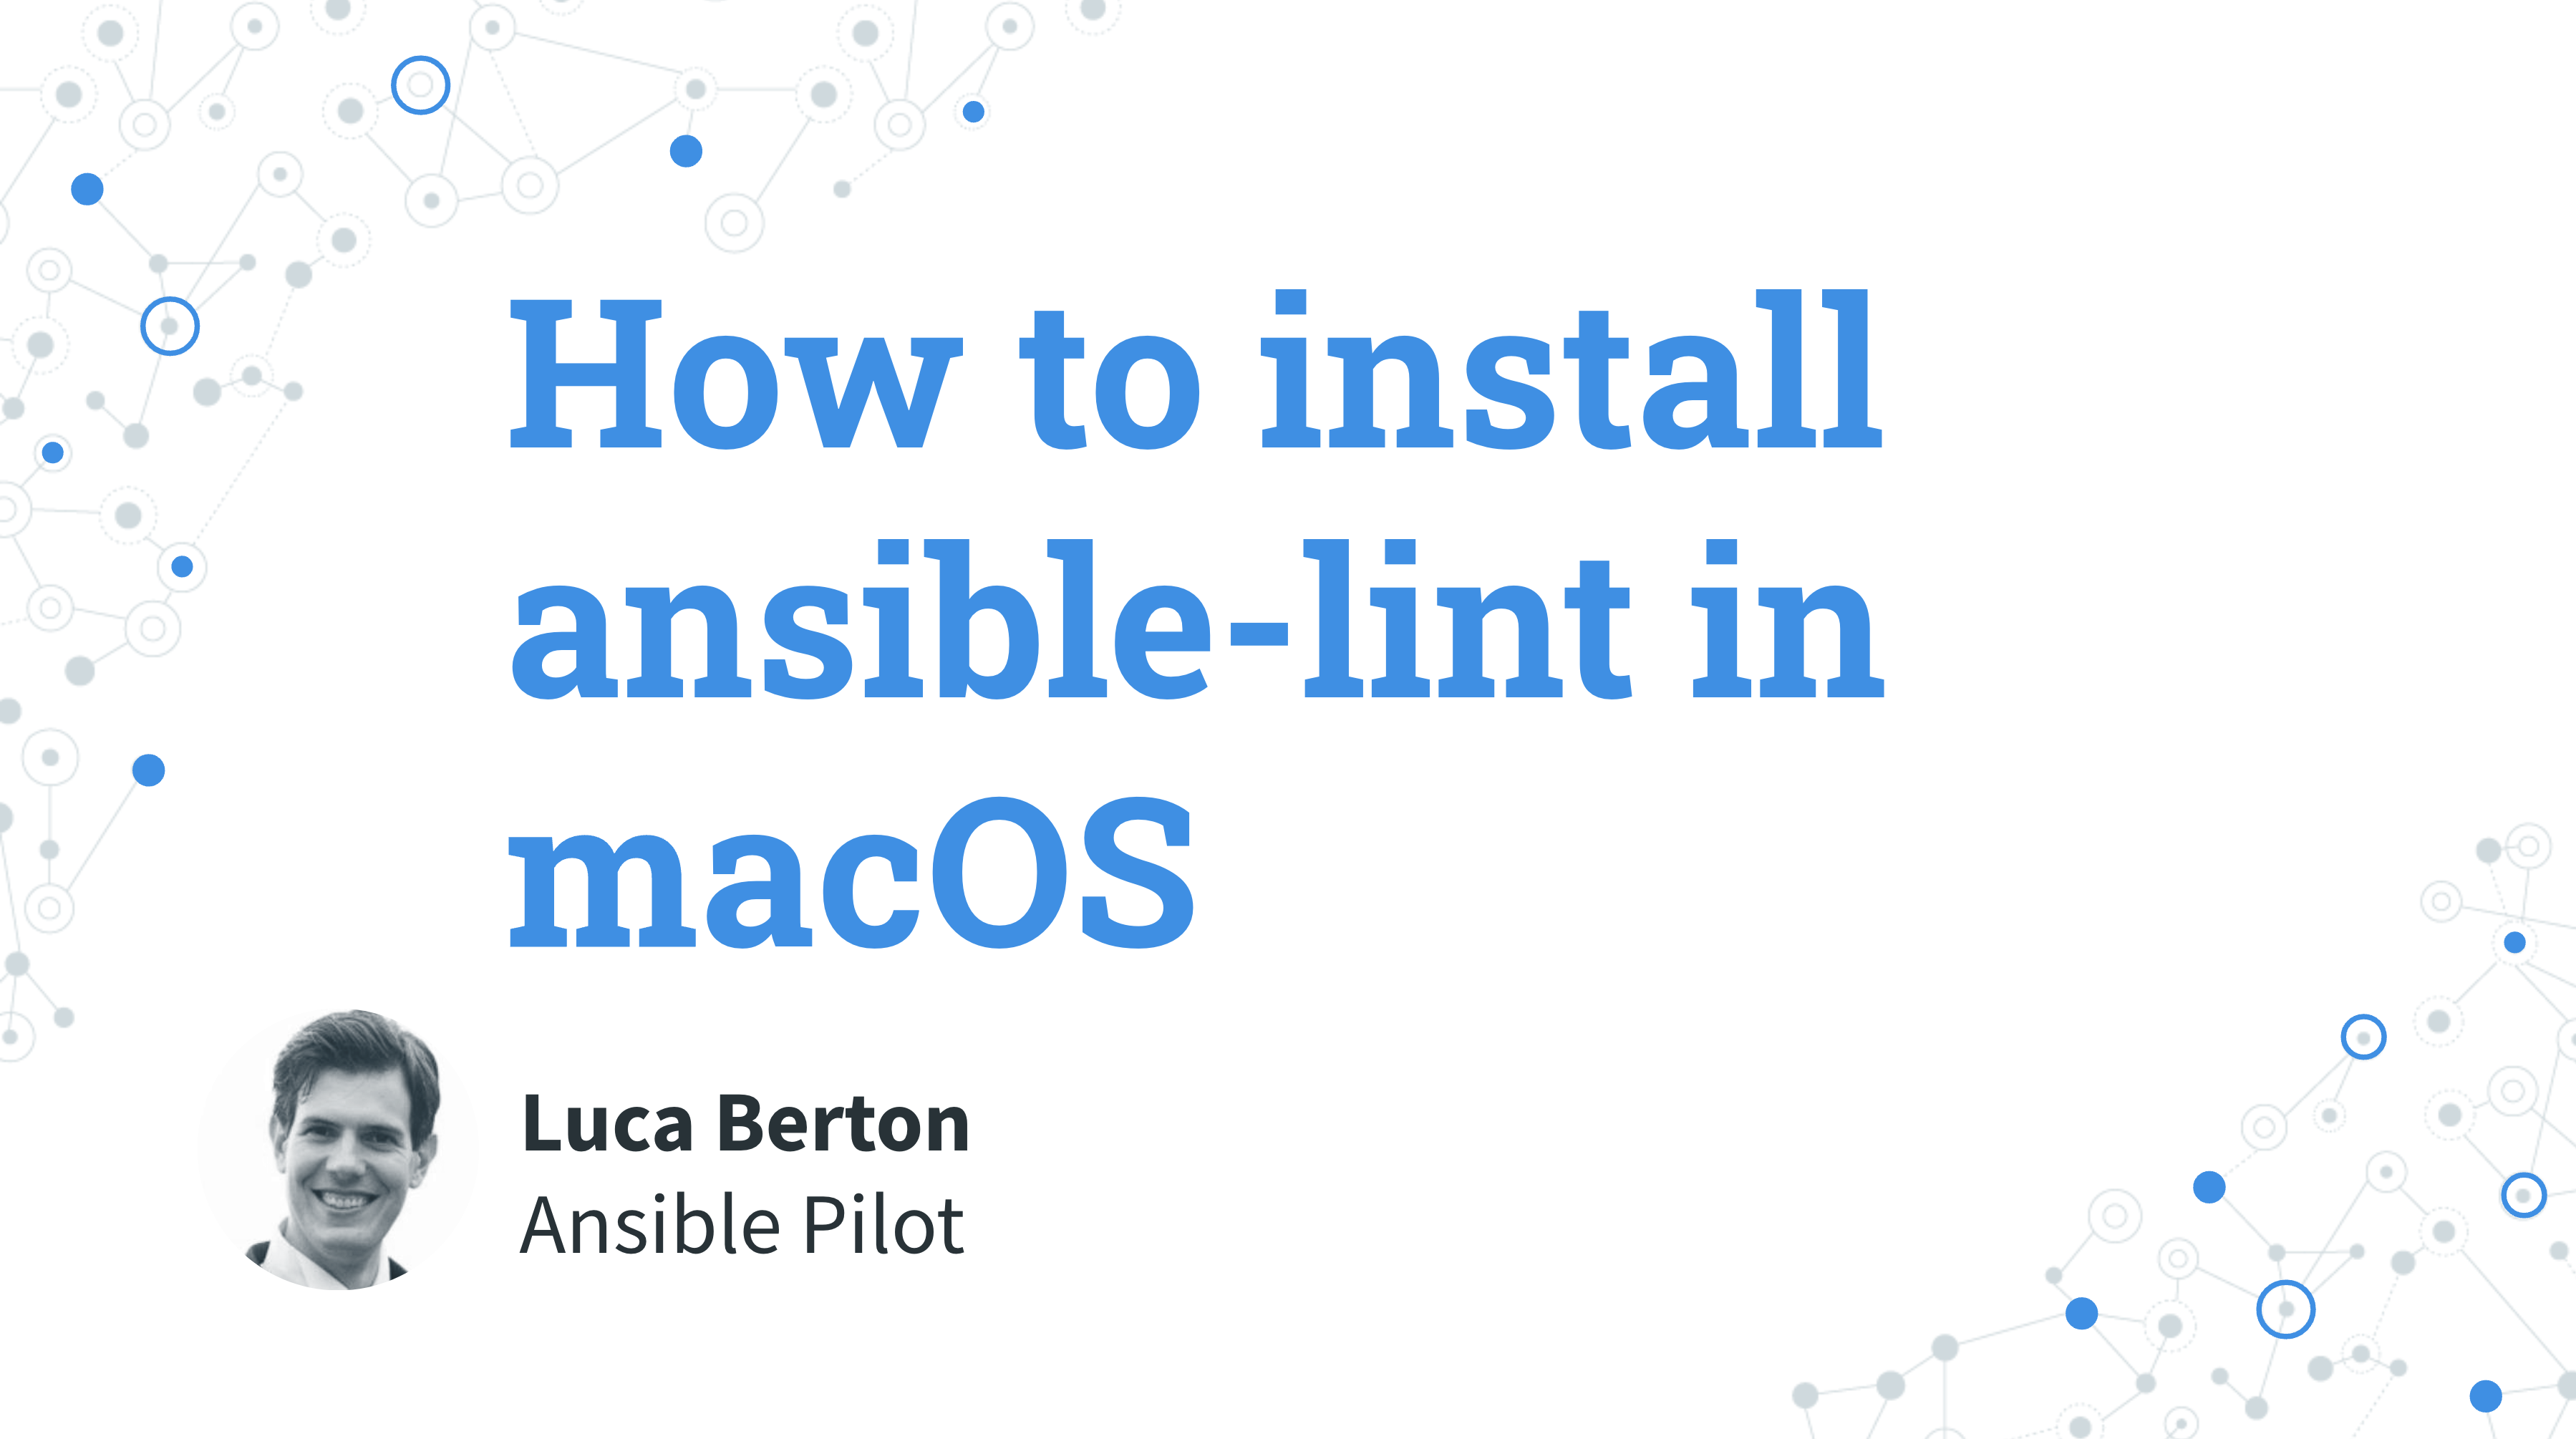 How to install ansible-lint in macOS